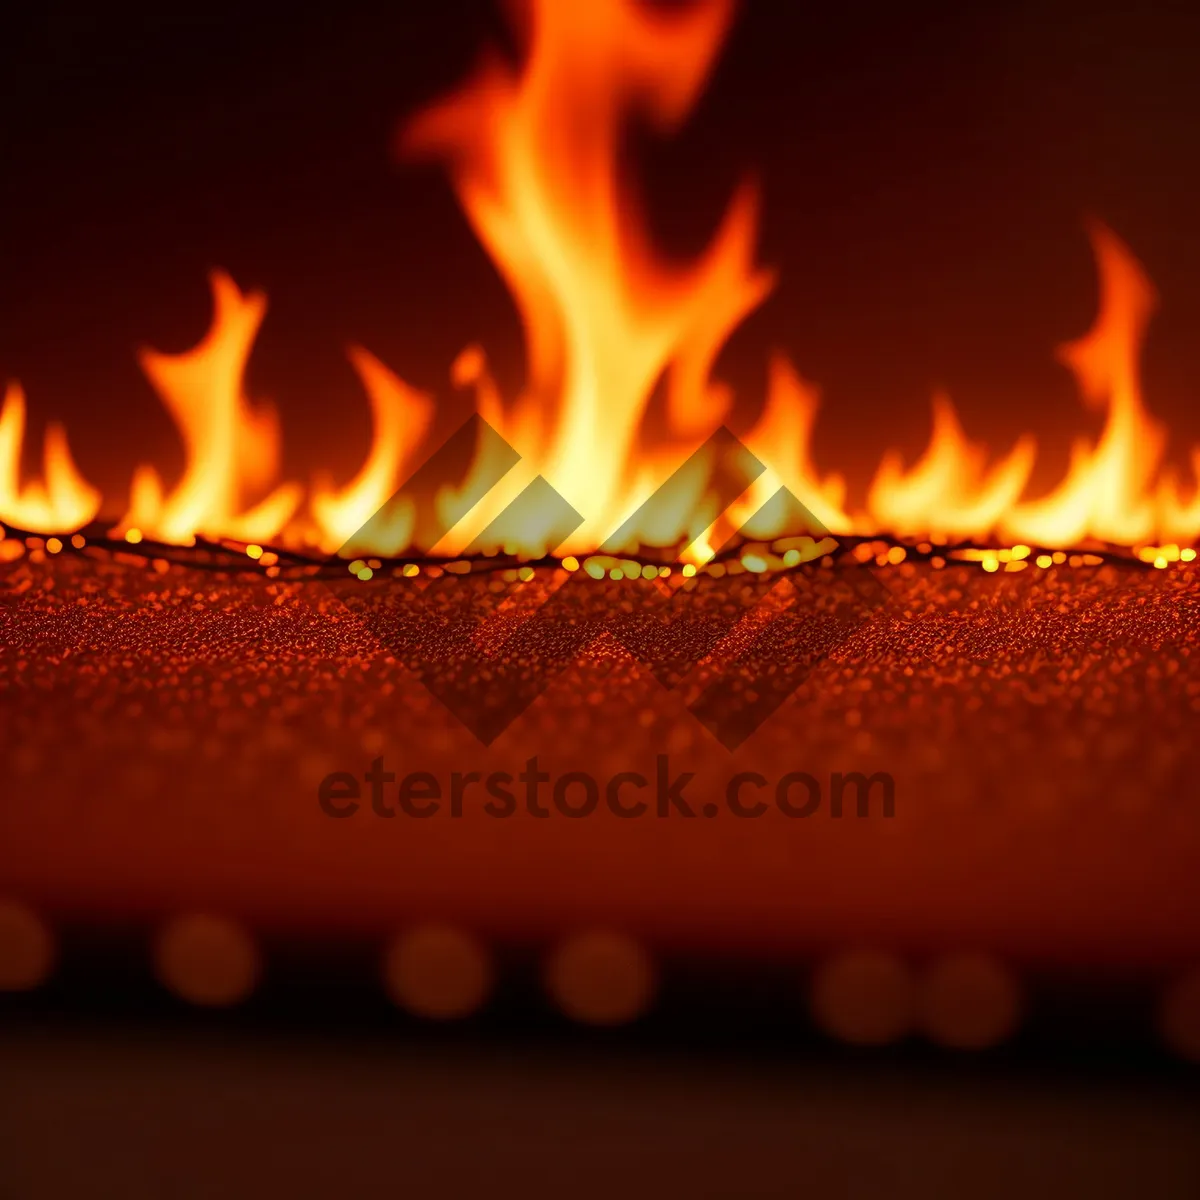 Picture of Fiery Flame Flicker: Intense Heat and Burning Brilliance.